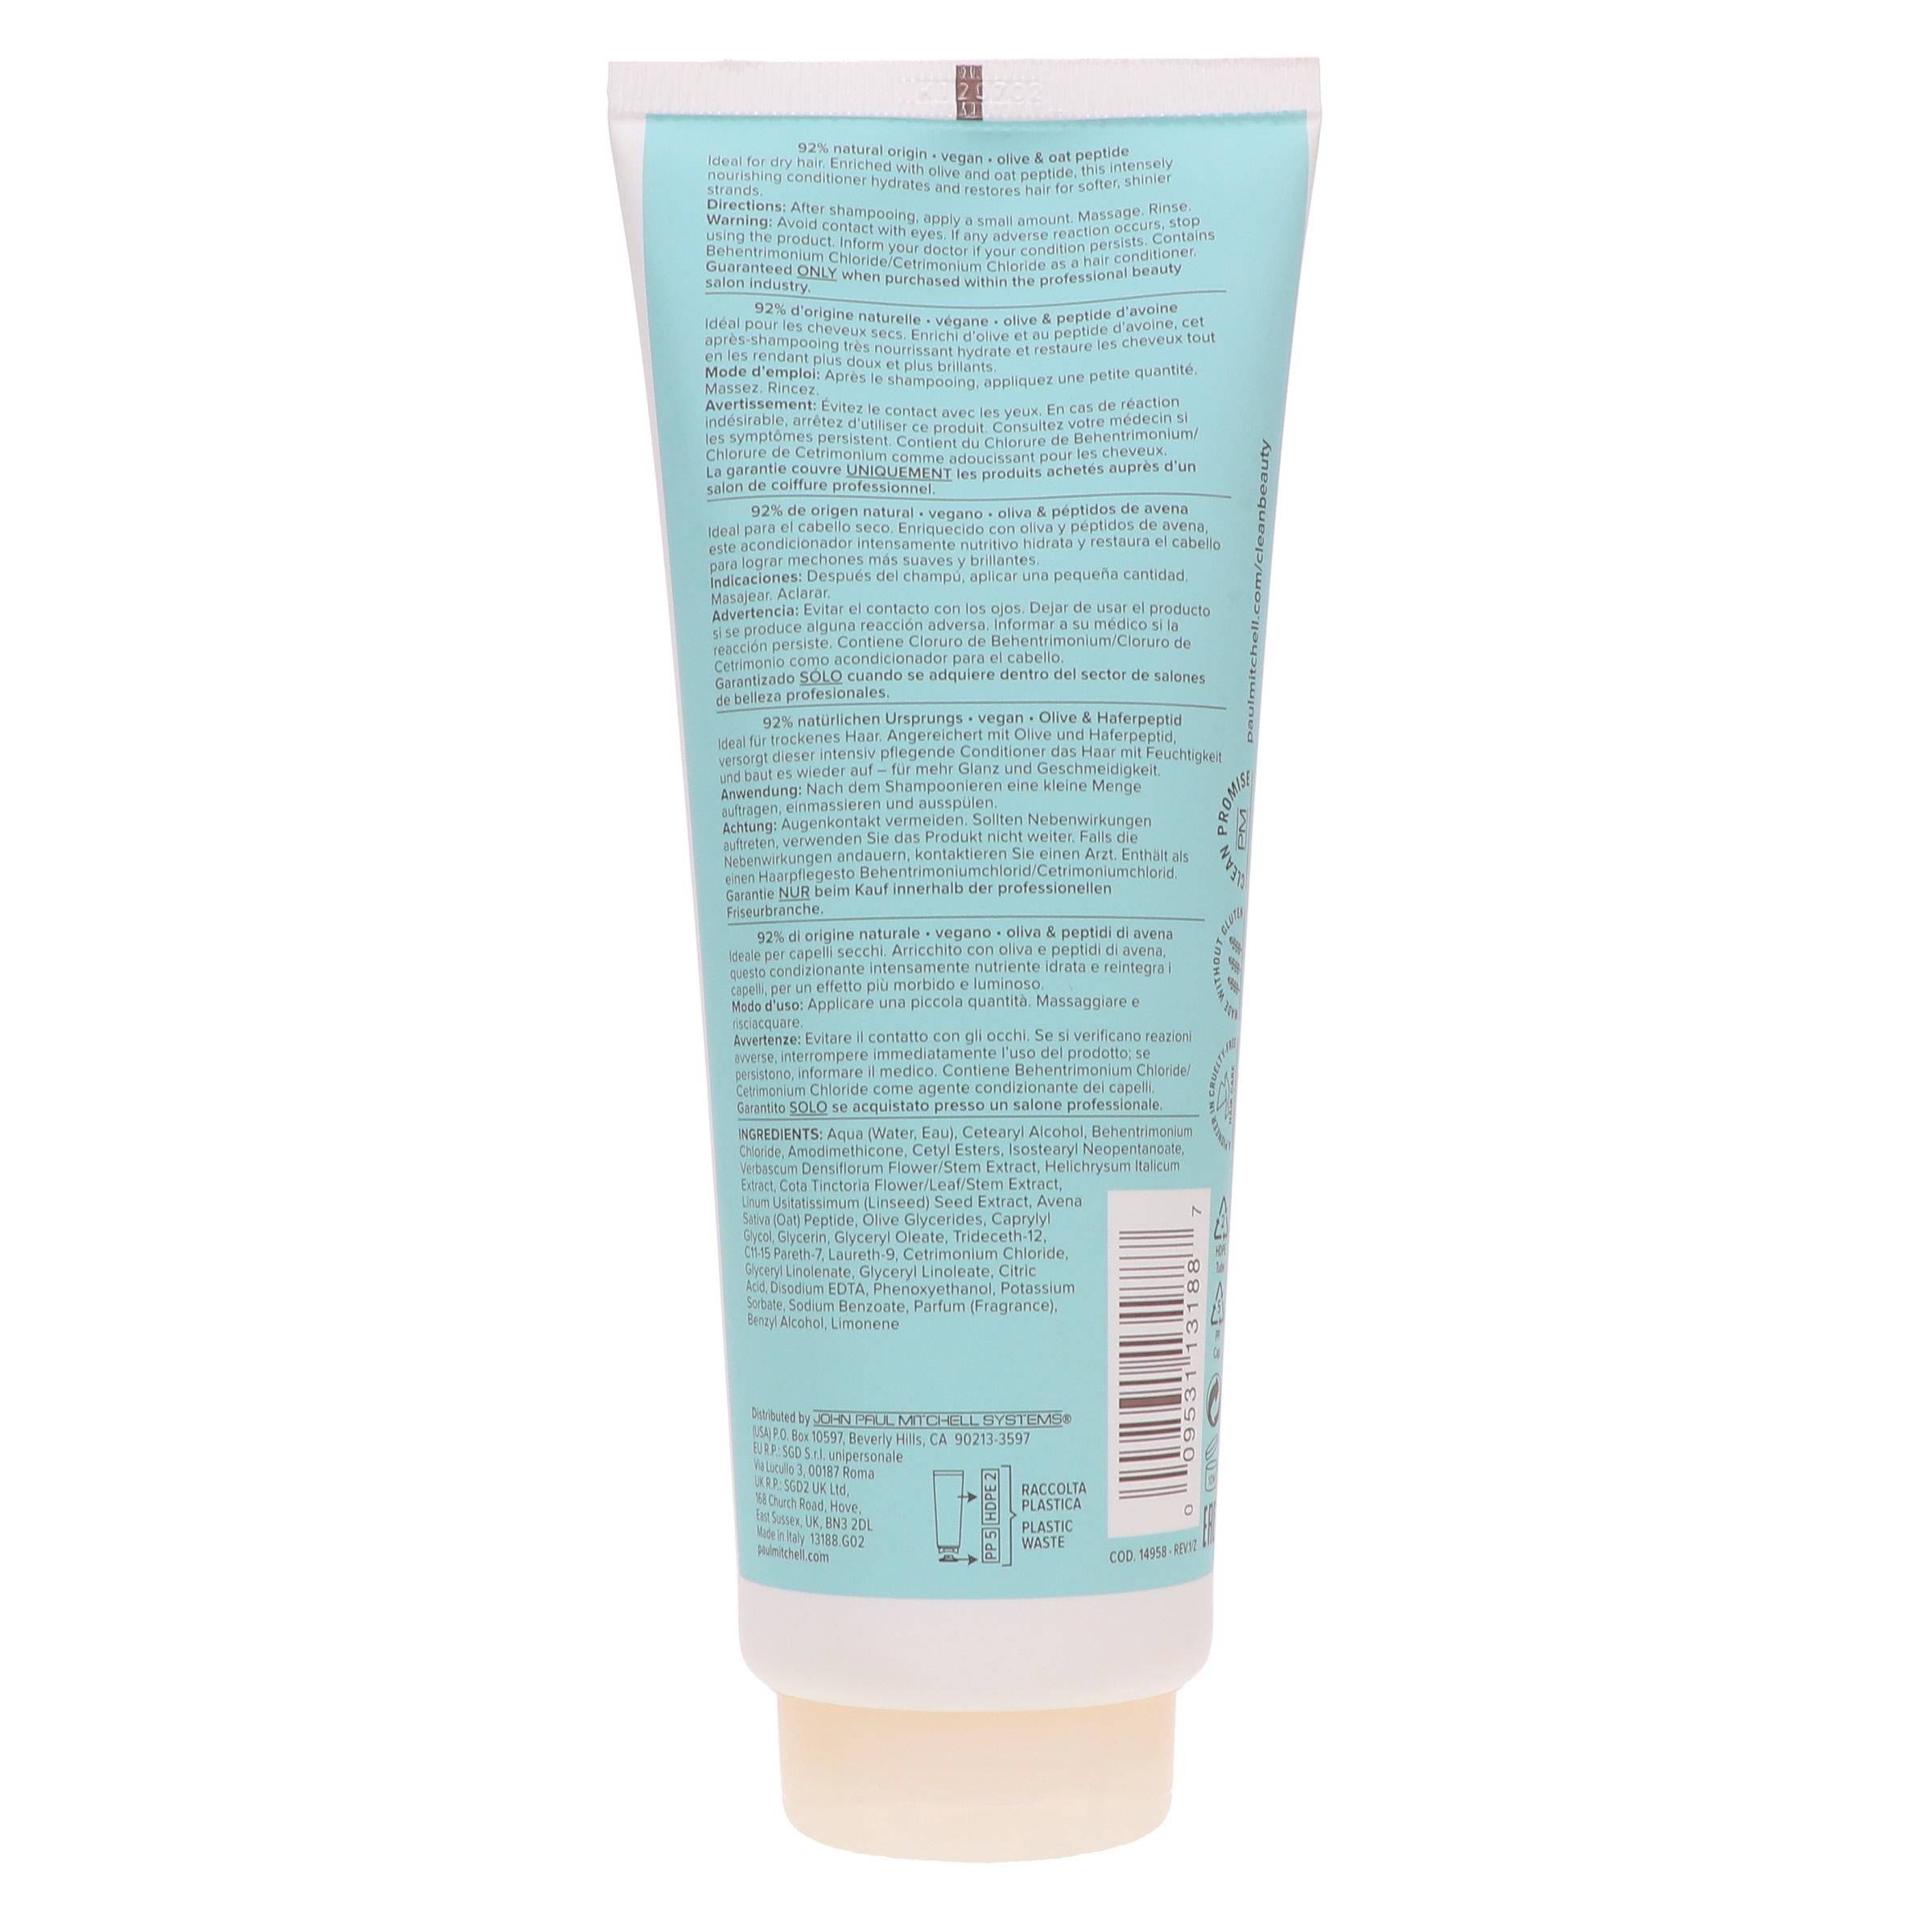 Paul Mitchell Clean Beauty Hydrate Conditioner 8.5 oz - image 5 of 8